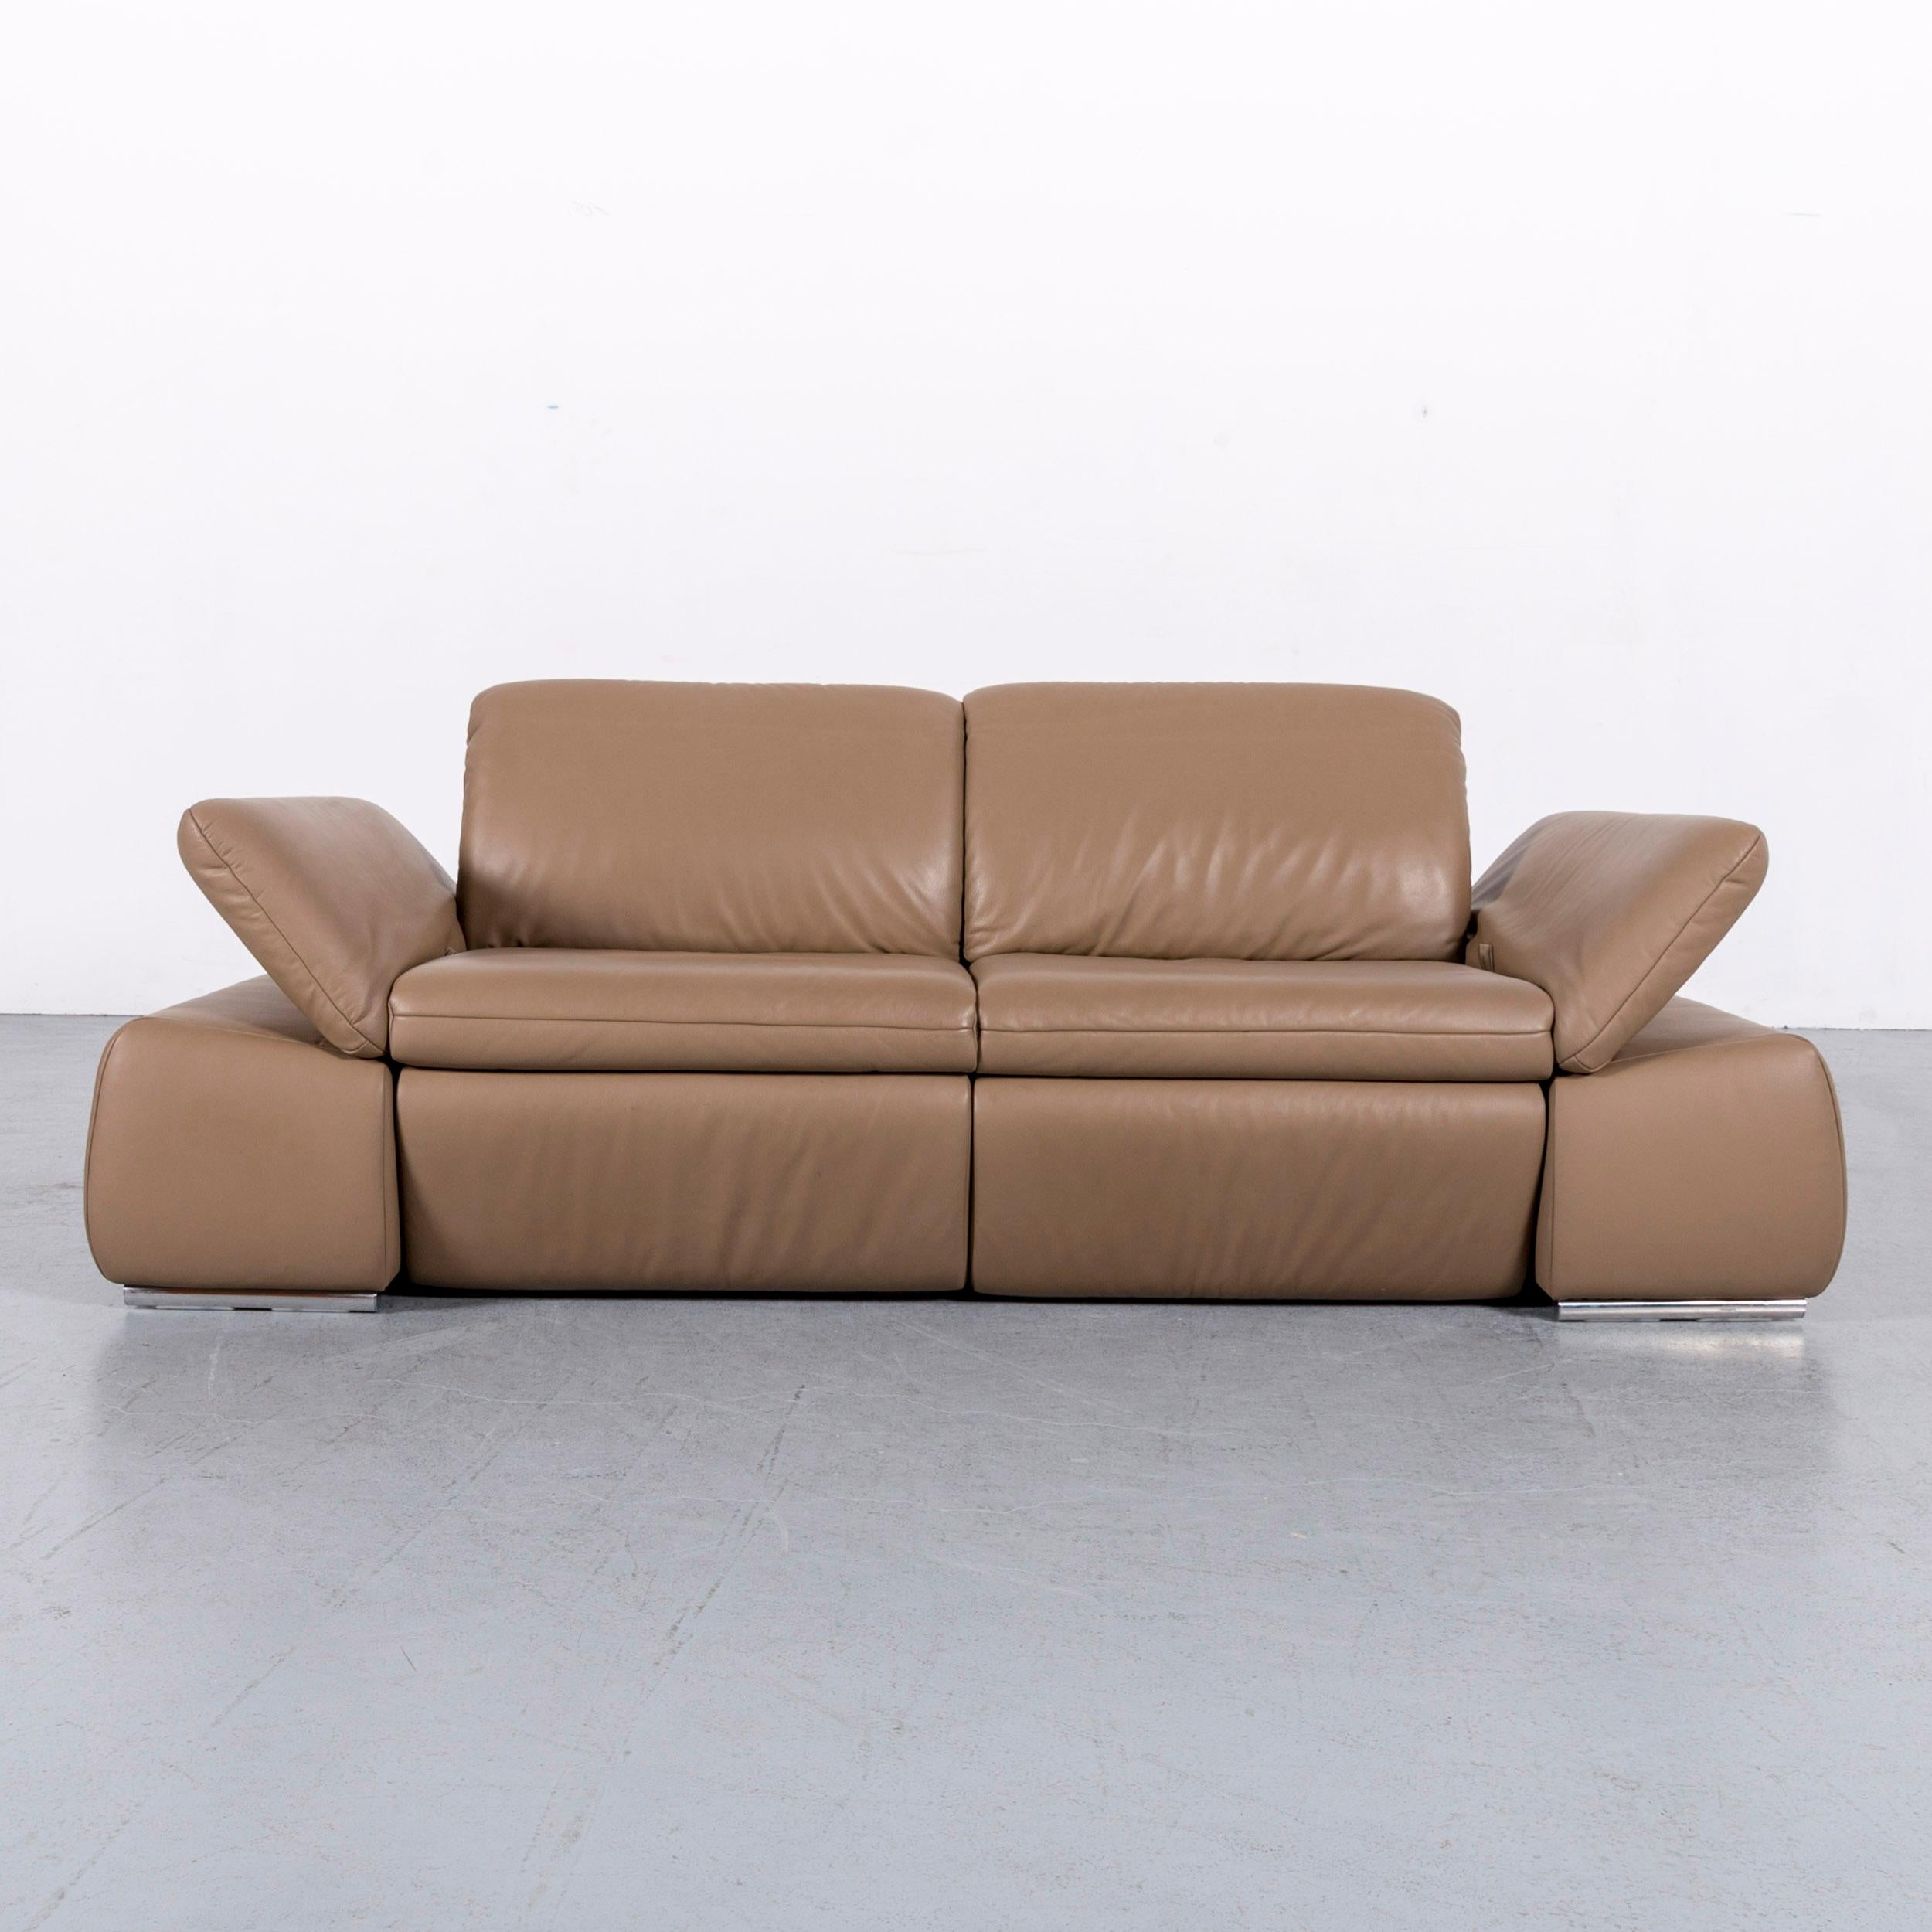 We bring to you an Koinor designer leather sofa brown beige couch two-seat relax function.